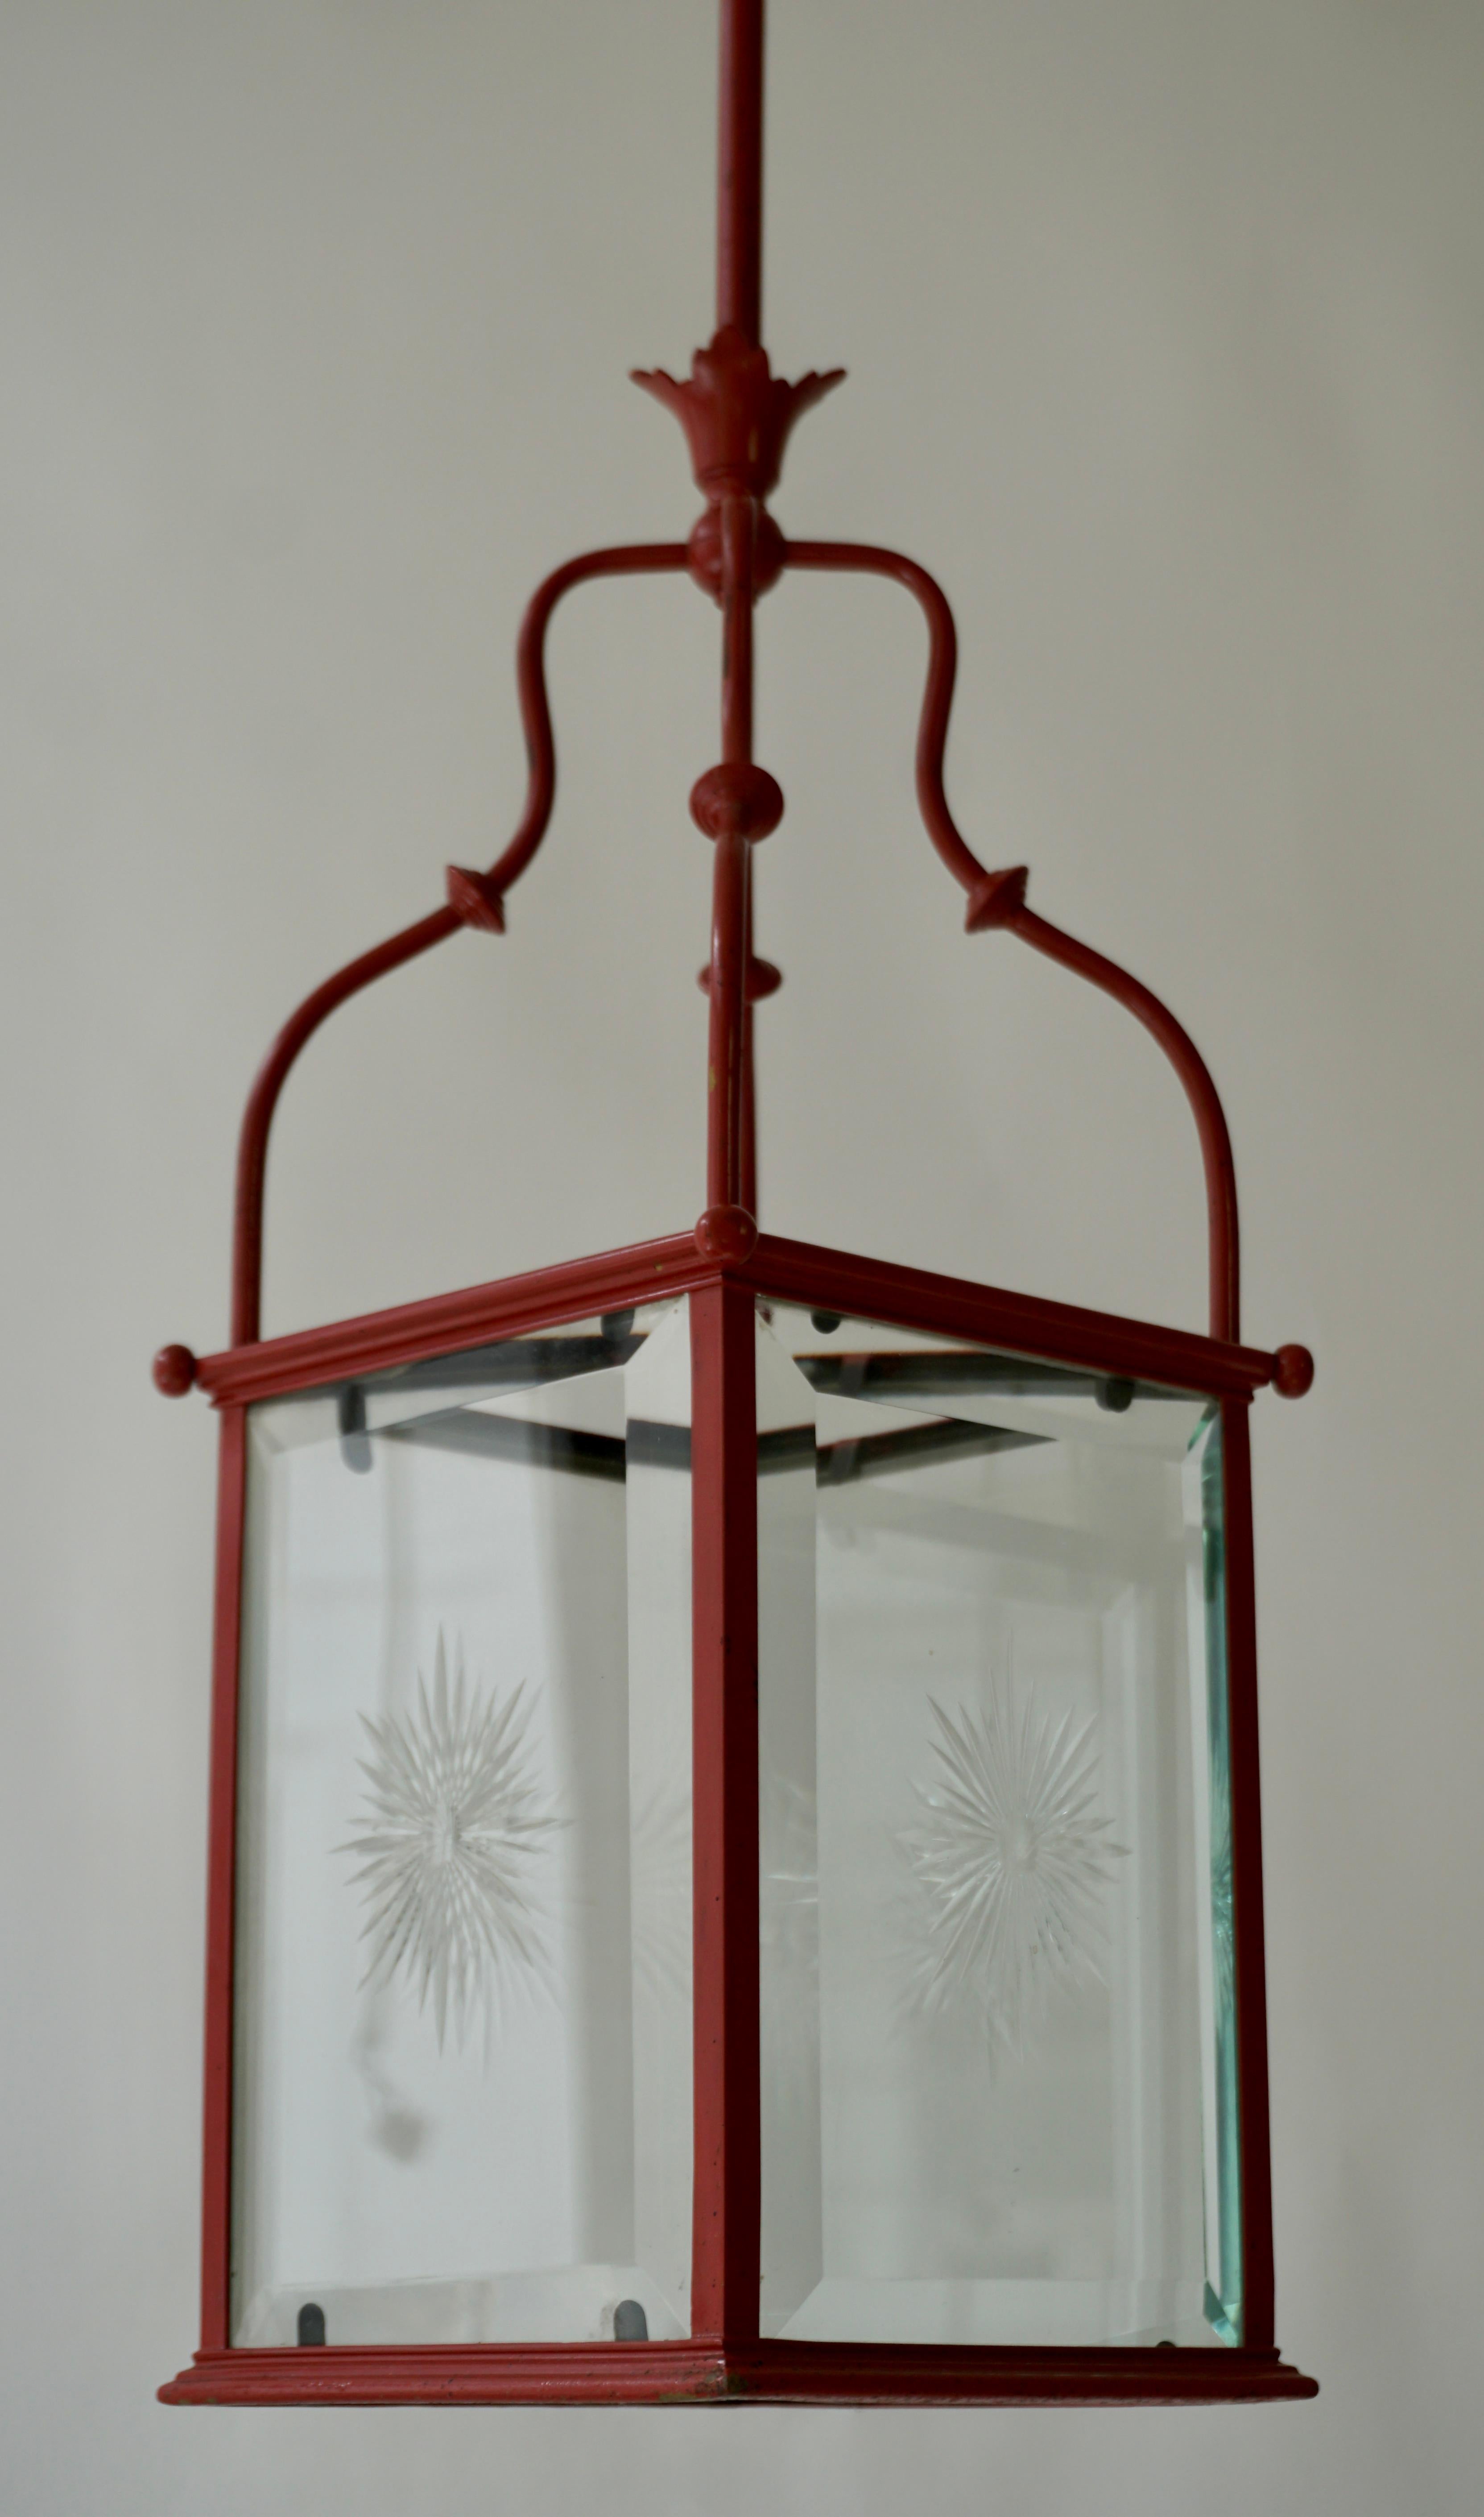 An Italian Red Tole Metal Lantern with Cut Glass, Early 20th C. For Sale 2